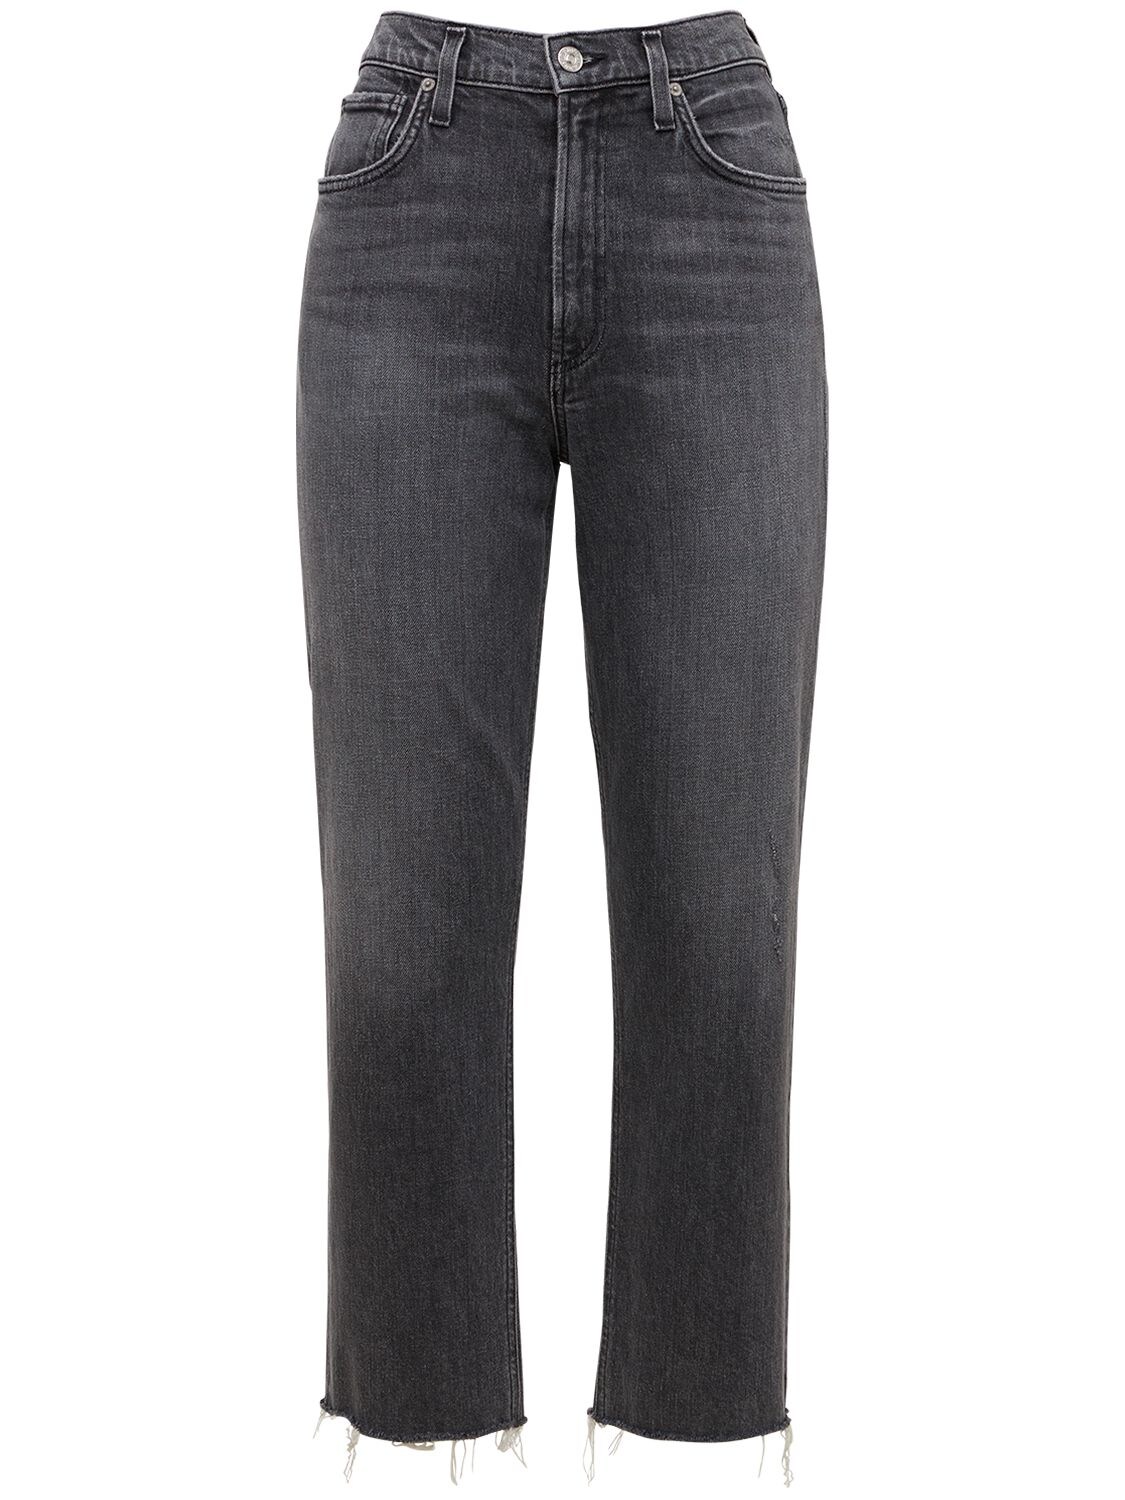 Daphne High Rise Crop Straight Jeans - CITIZENS OF HUMANITY - Modalova